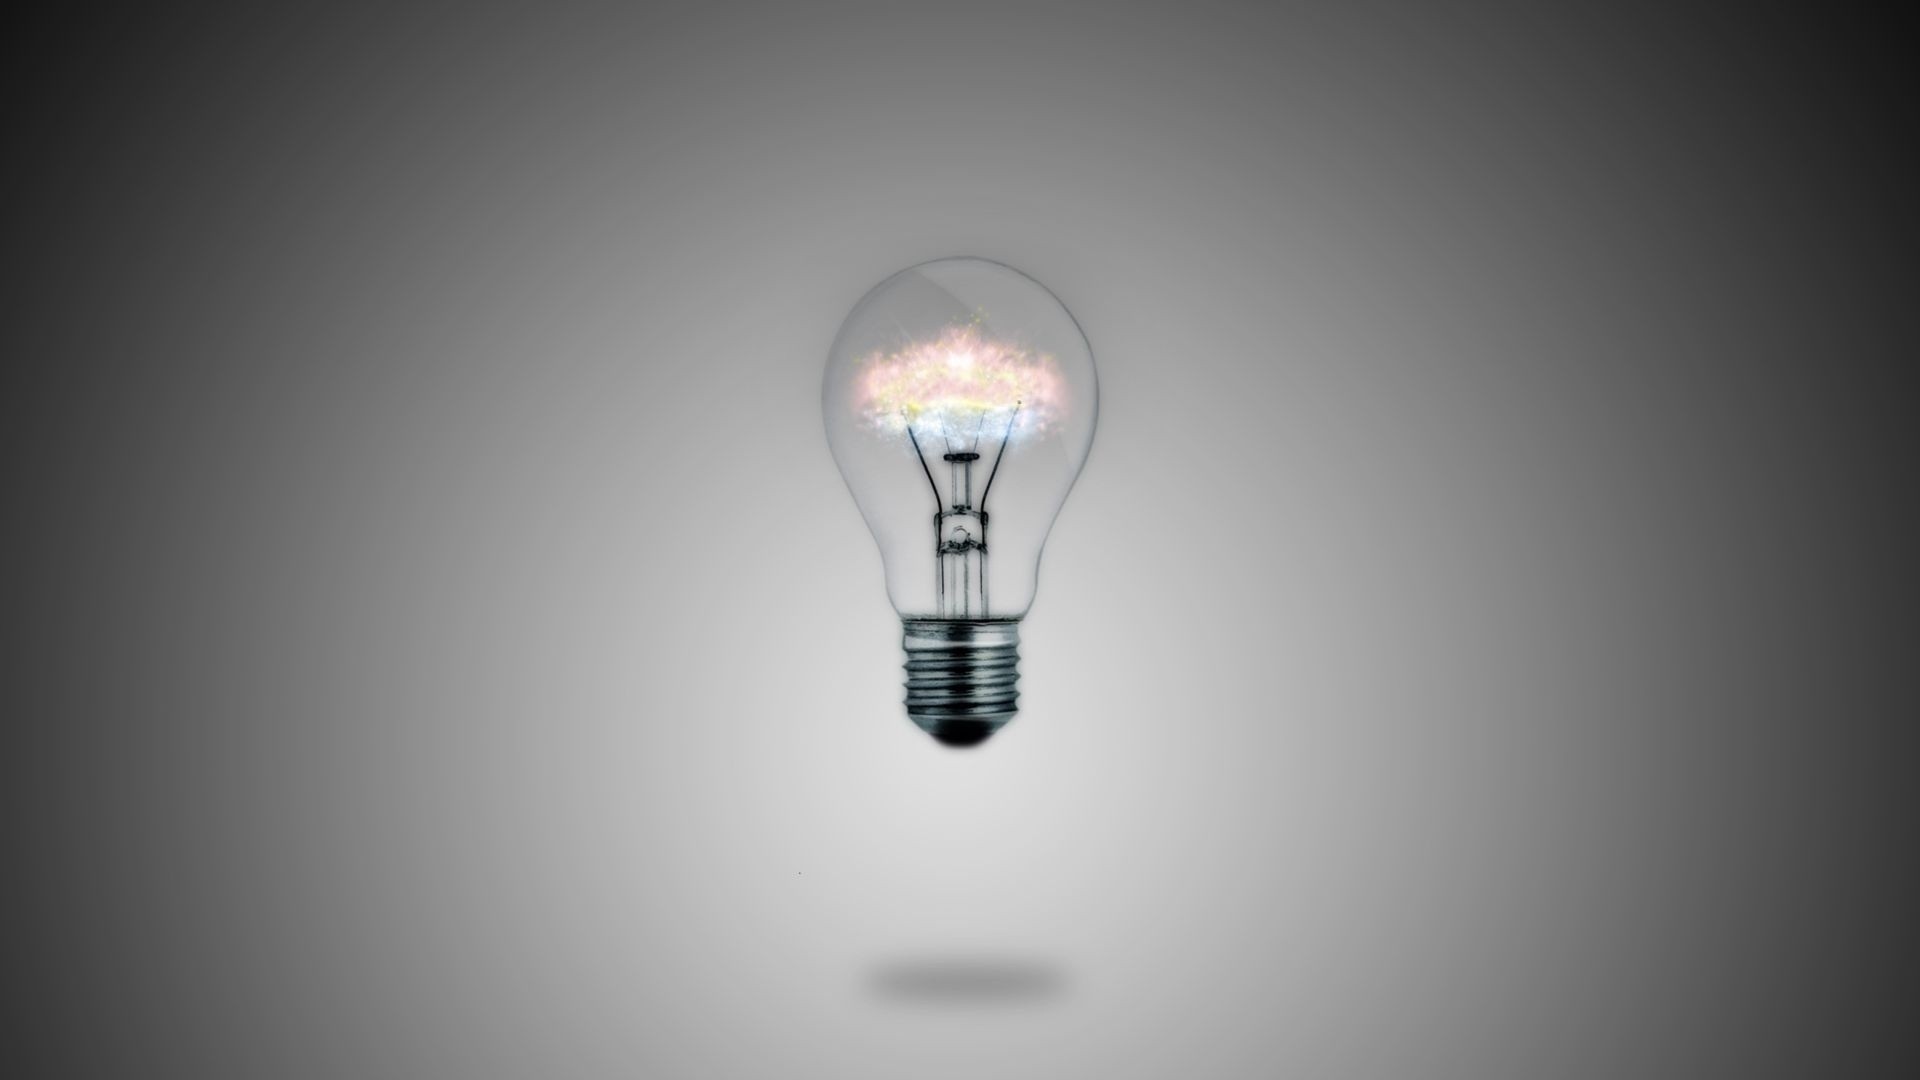 1920x1080 Light bulb - photo wallpapers, pictures with bulbs